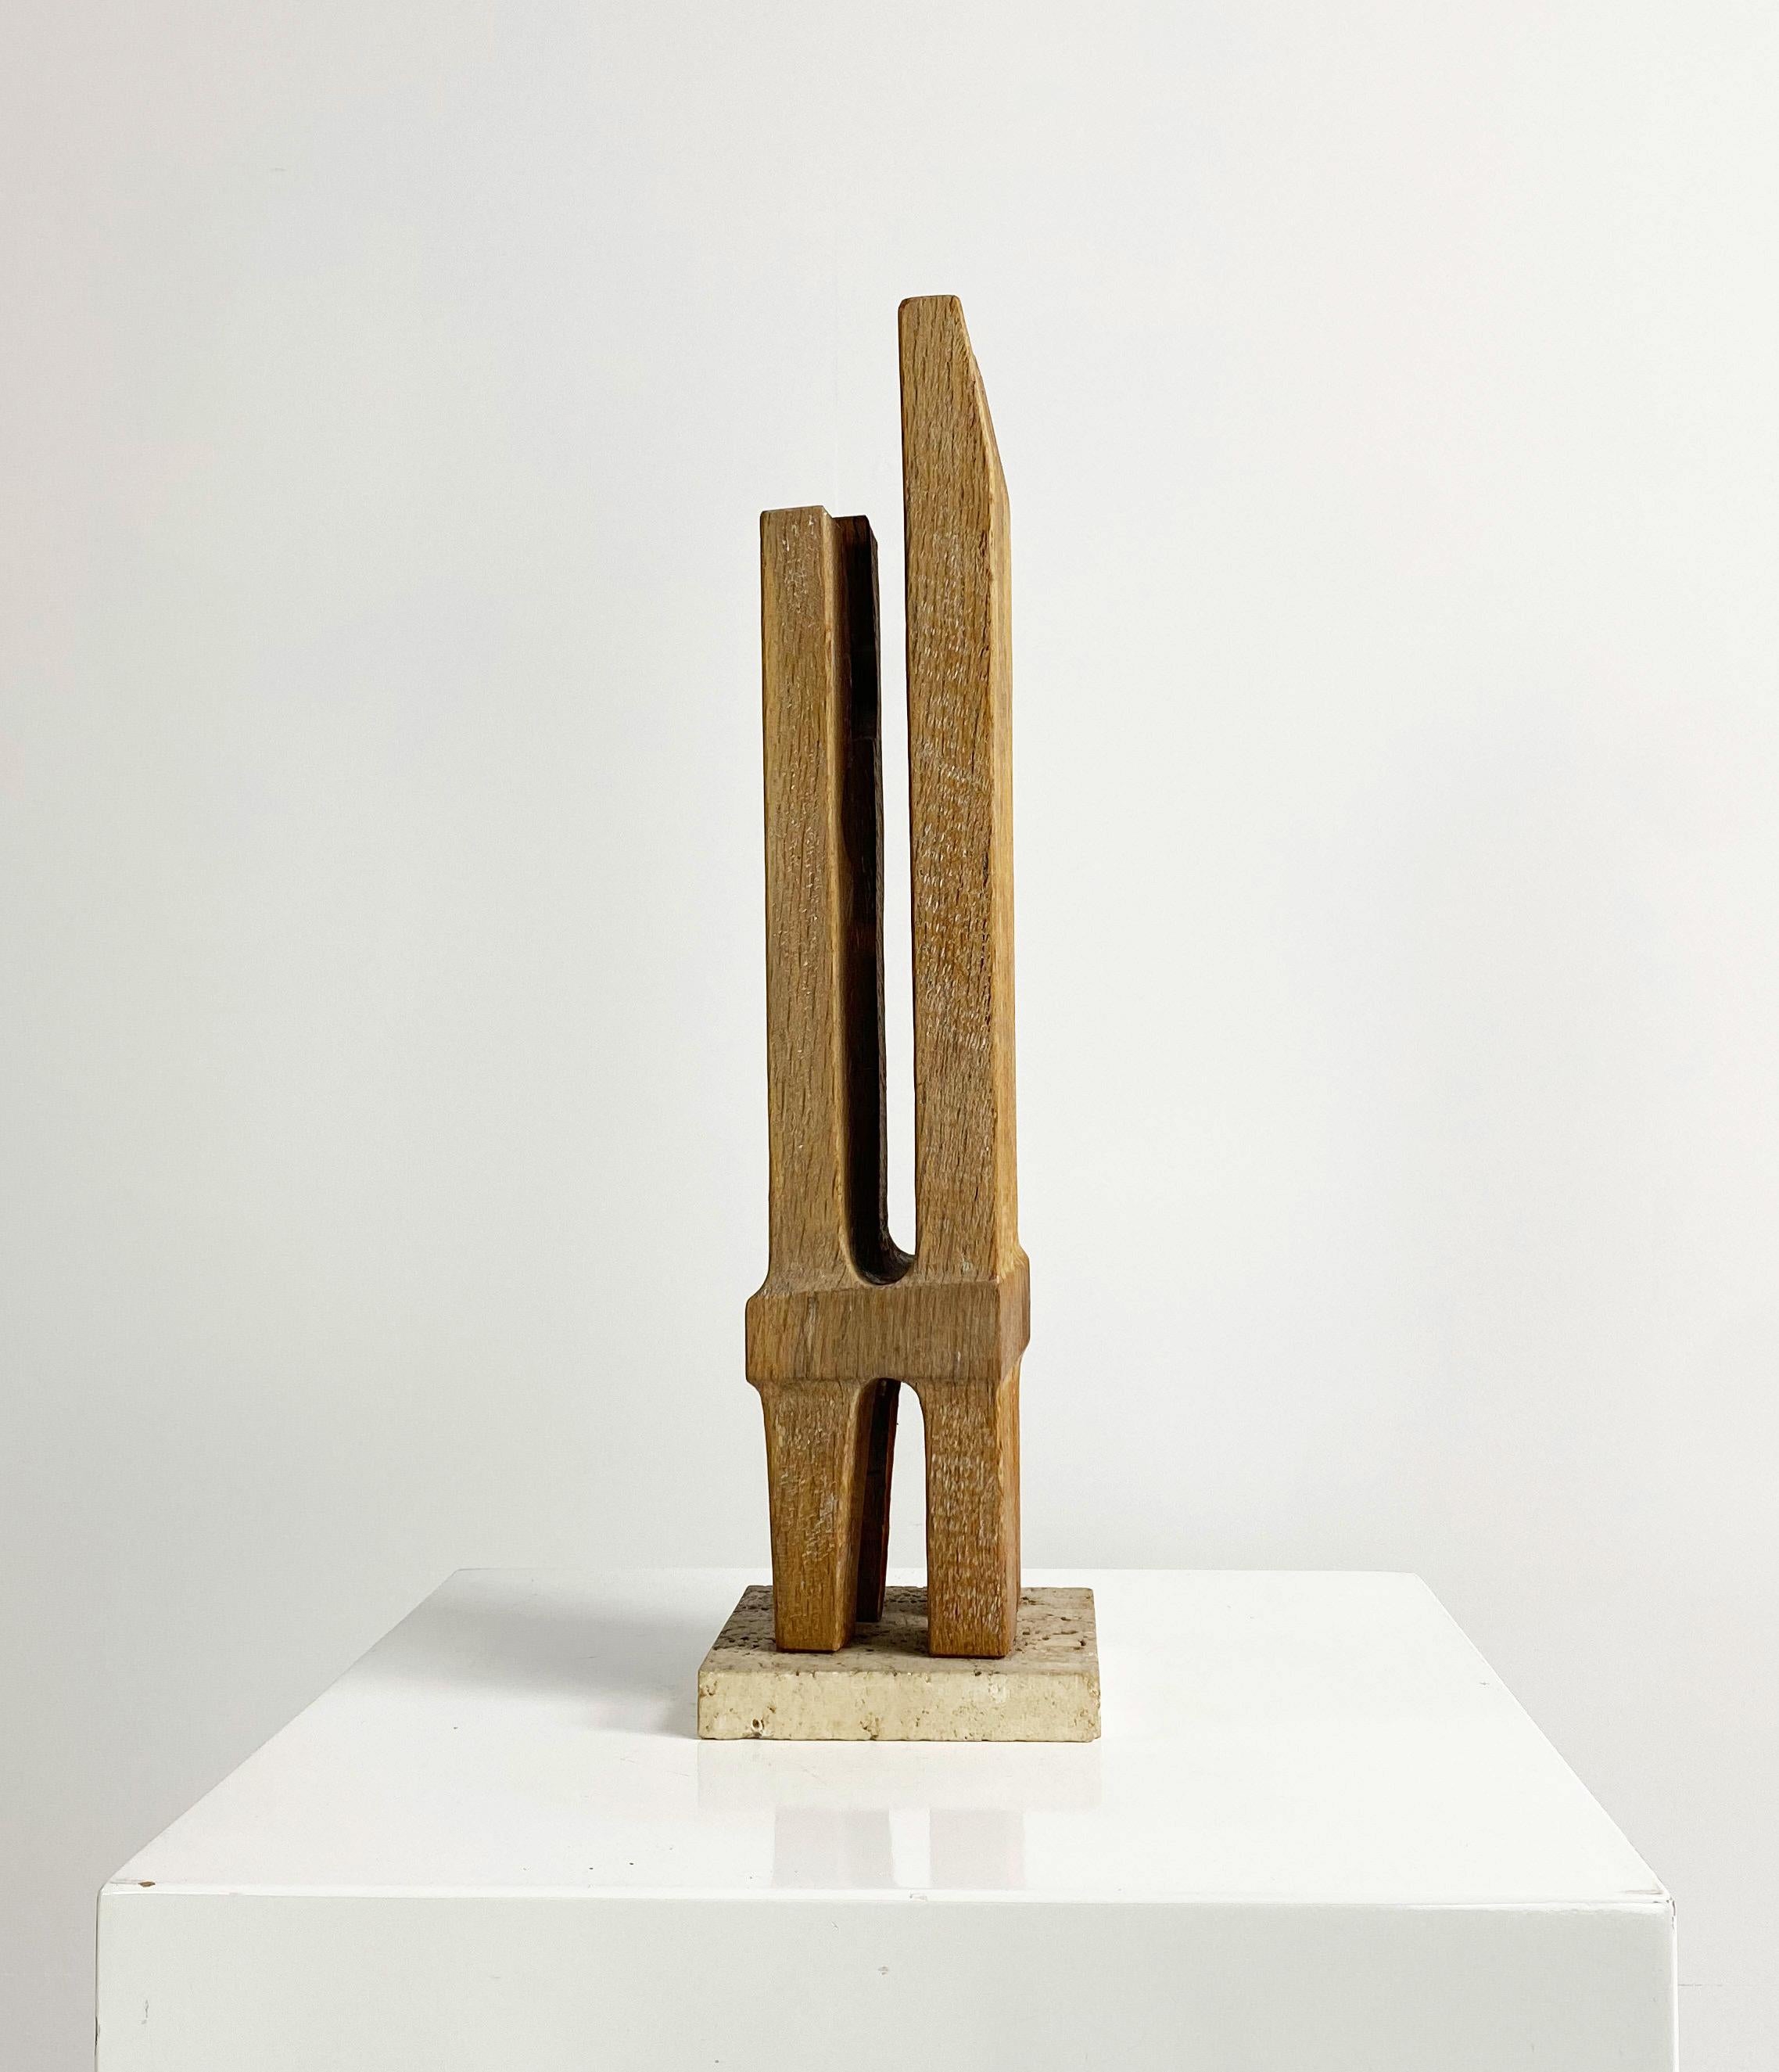 British Abstract Wooden Sculpture 'Untitled' by Ronald Pope